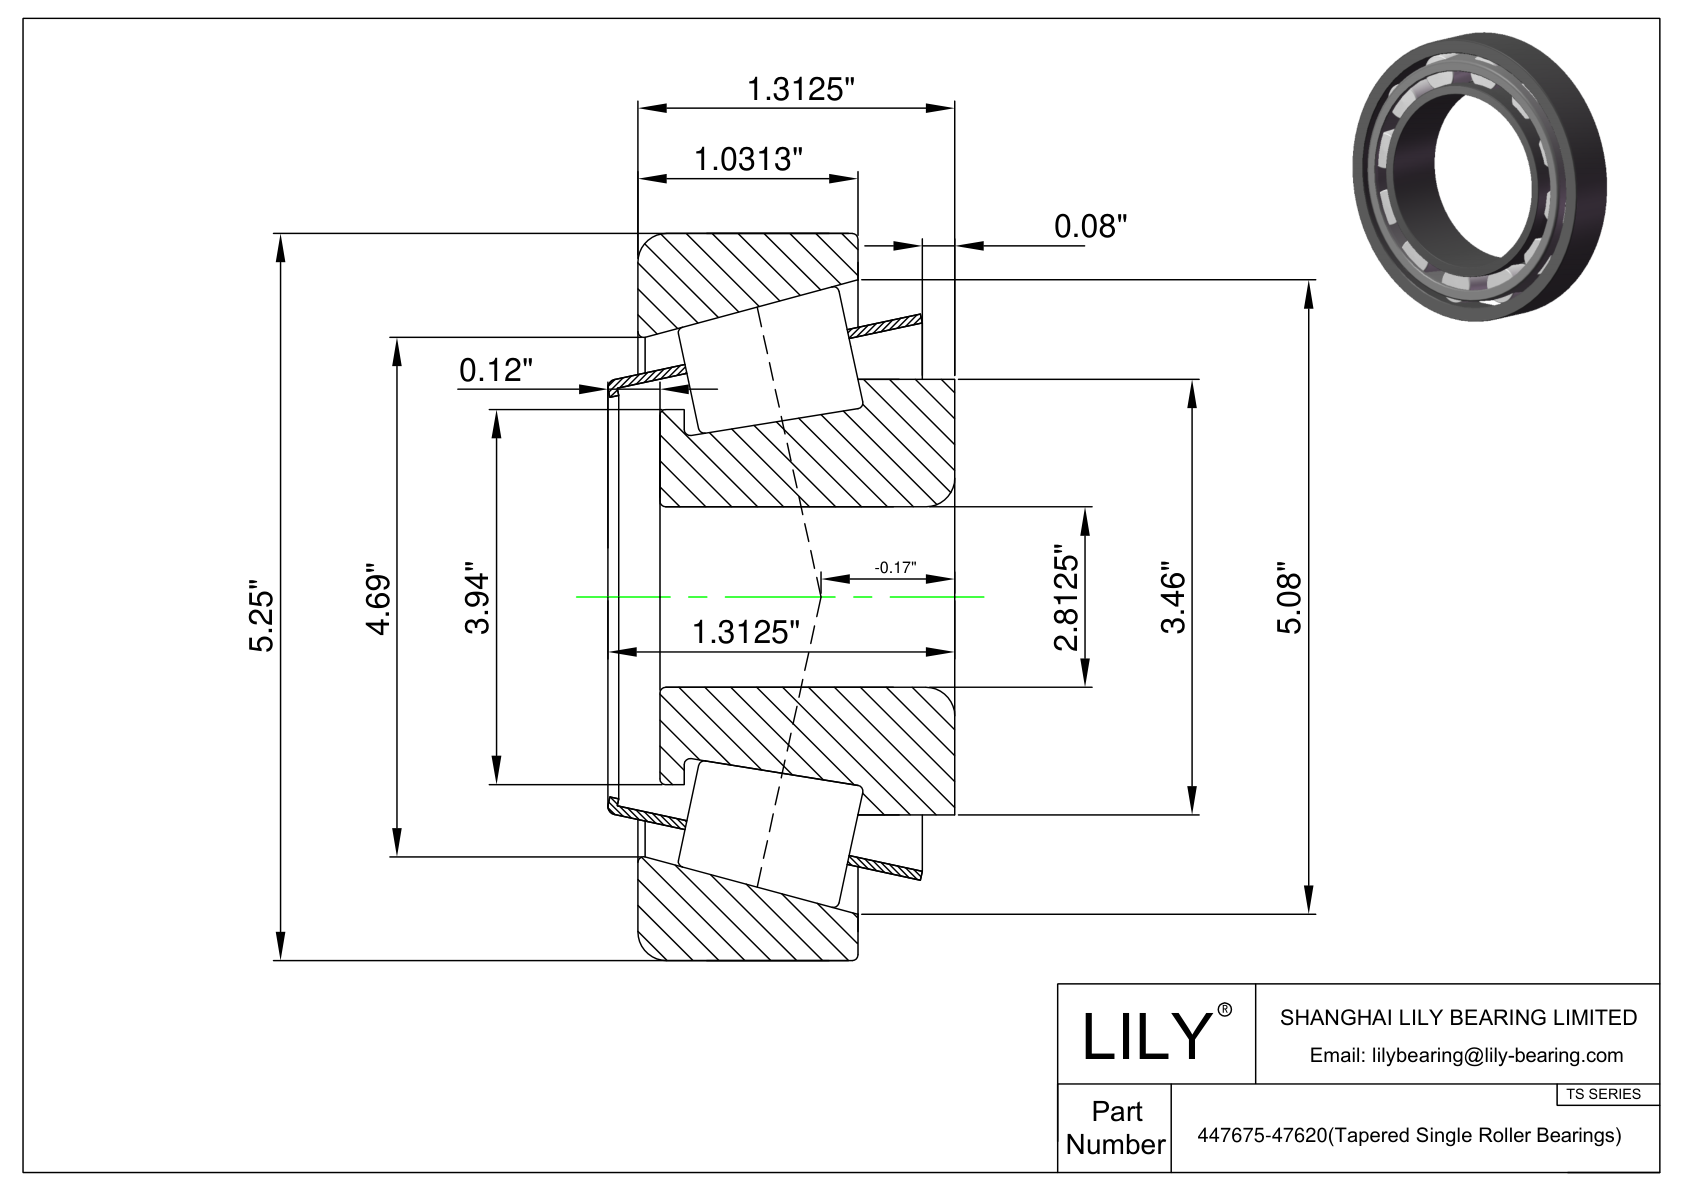 47675-47620 TS (Tapered Single Roller Bearings) (Imperial) cad drawing